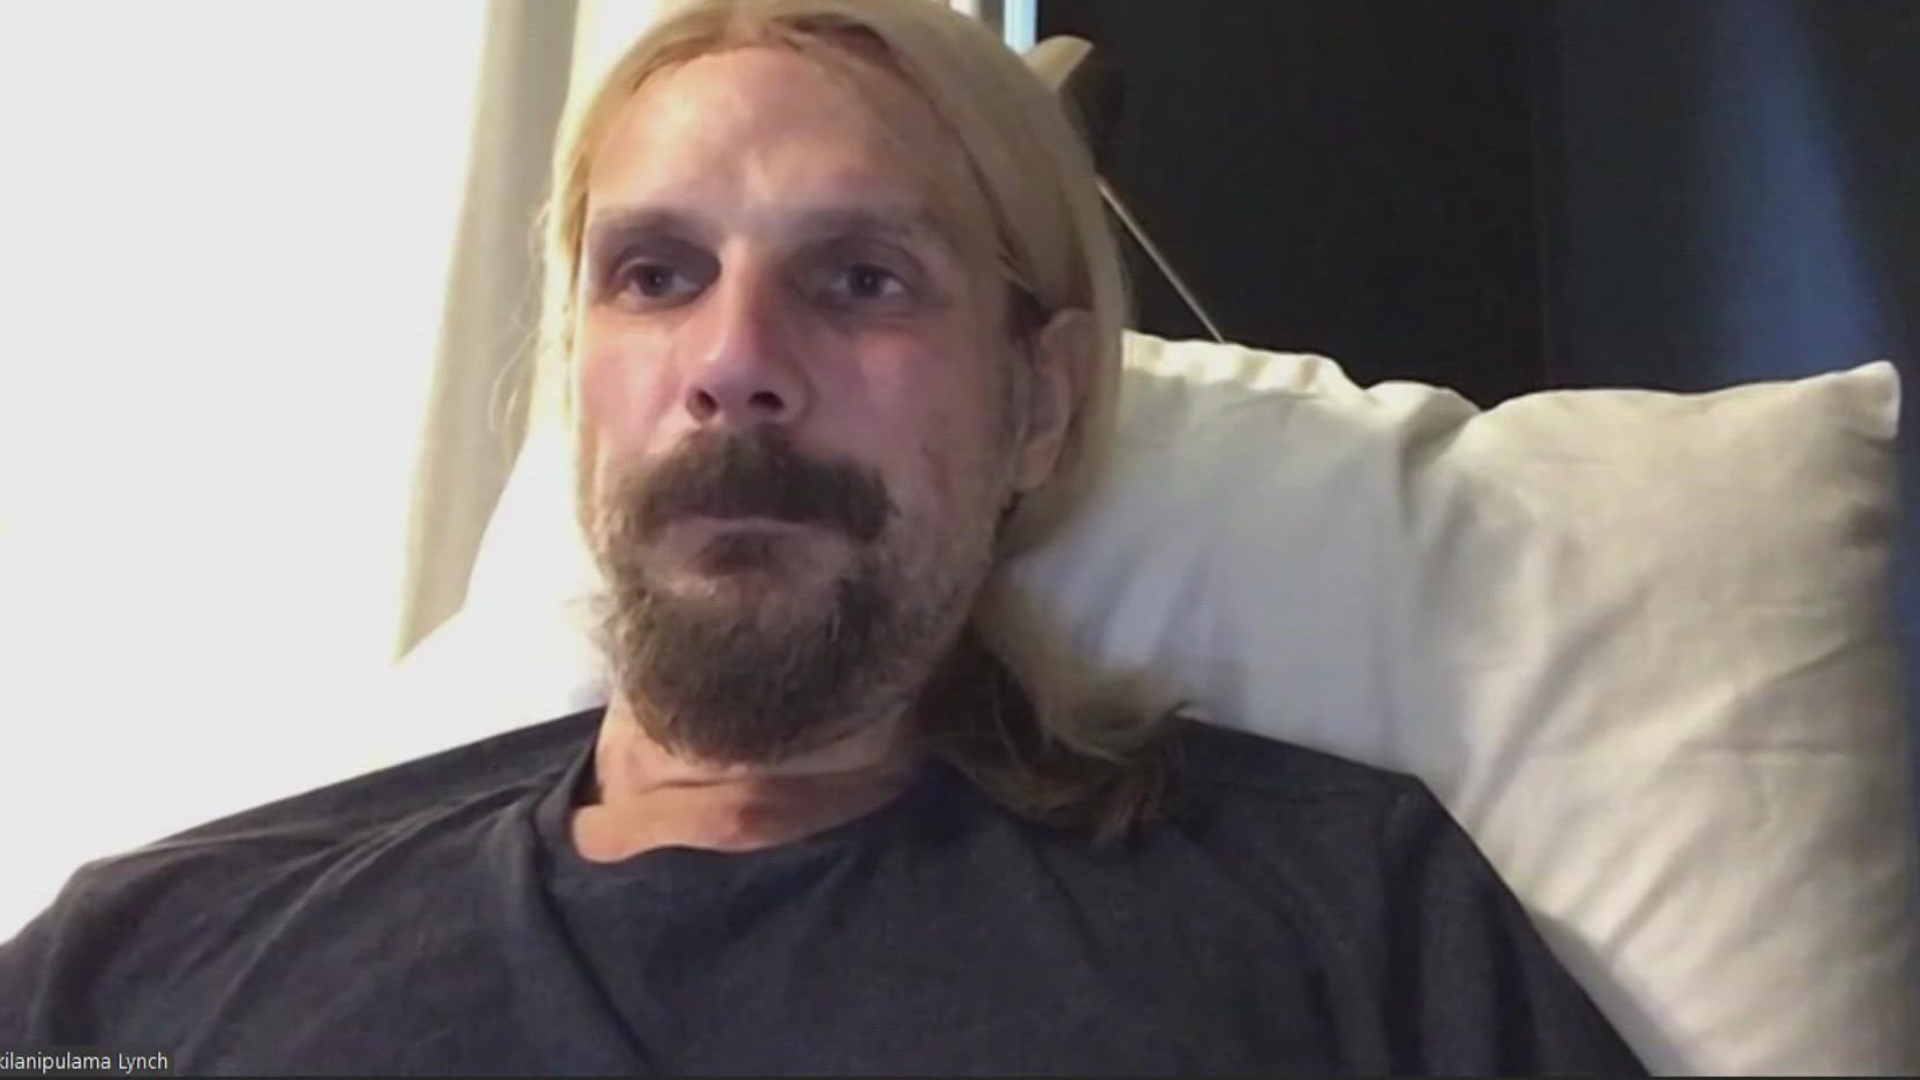 Richie Faulkner suffered an acute cardiac aortic dissection during the metal band's set at Louder than Life last month.